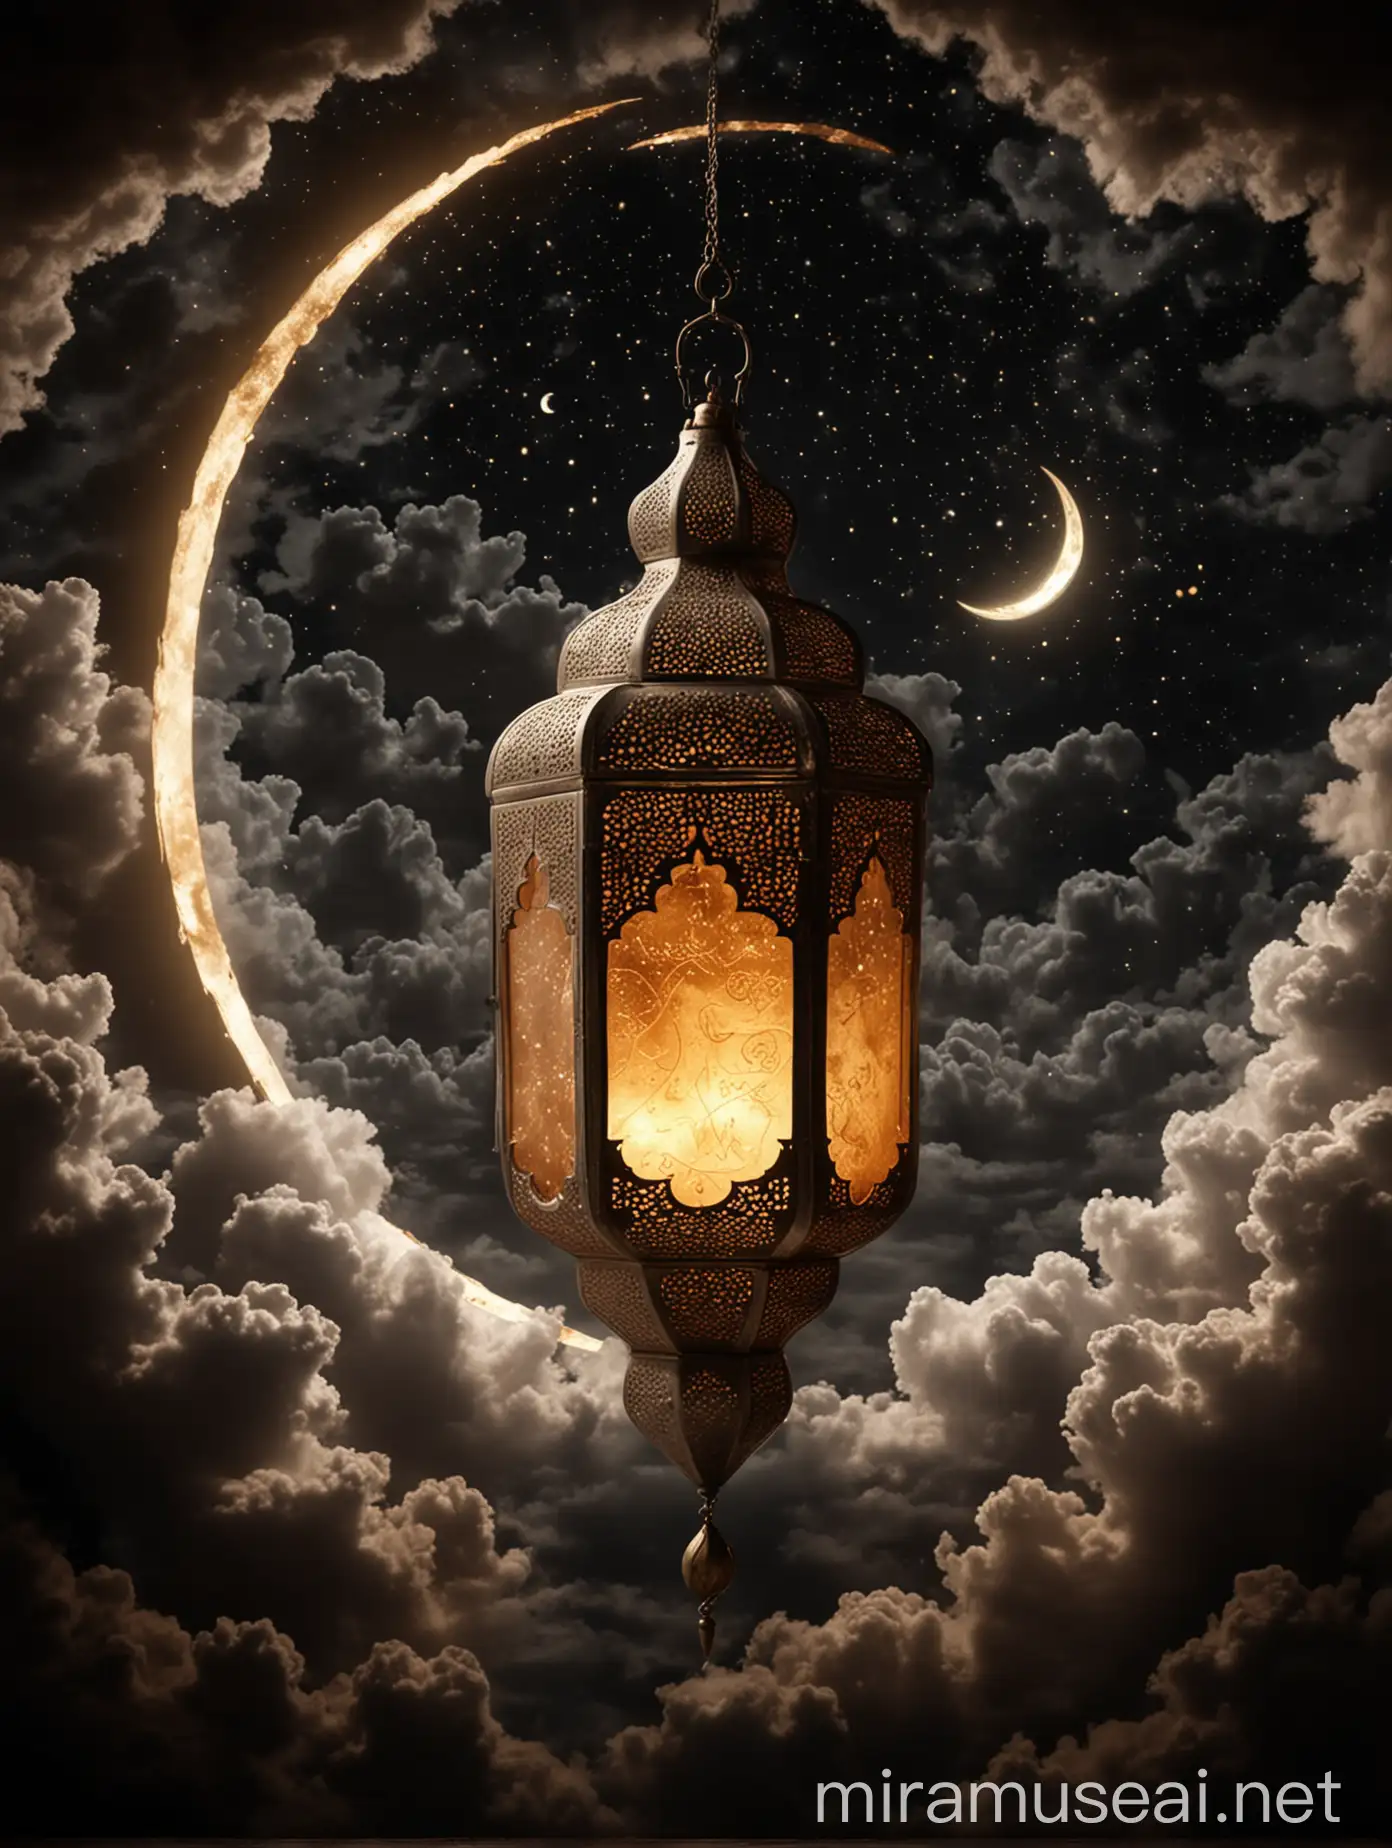 Thumbnail of A luminous Arabic lantern with a crescent inside it, with a dark background suggesting the holy month of Ramadan and some clouds.